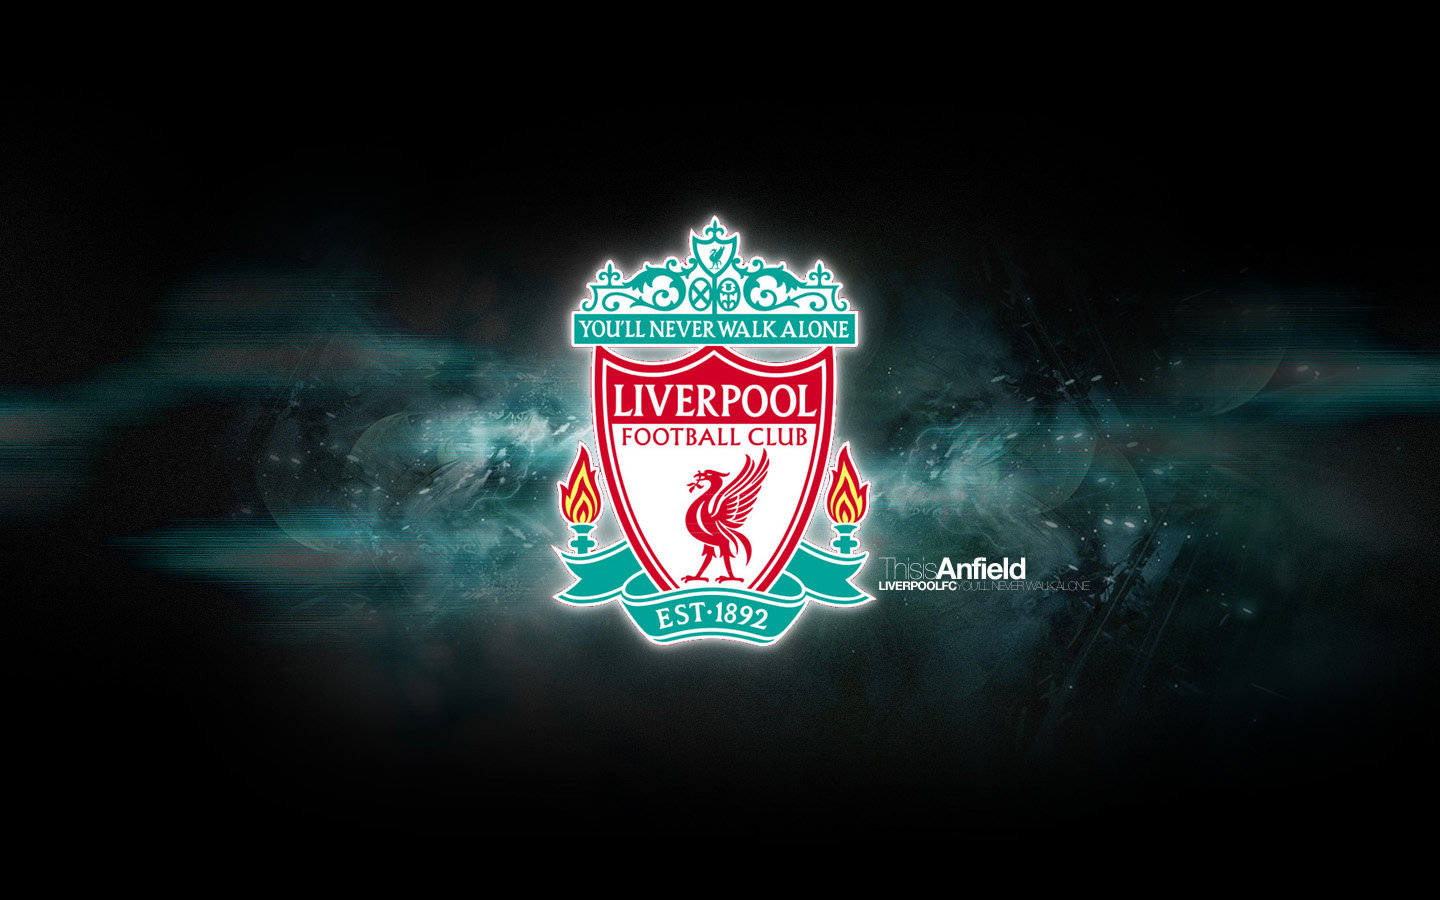 Liverpool Wallpaper Iphone Android Wallpaper with 1440x900 Resolution 1440x900